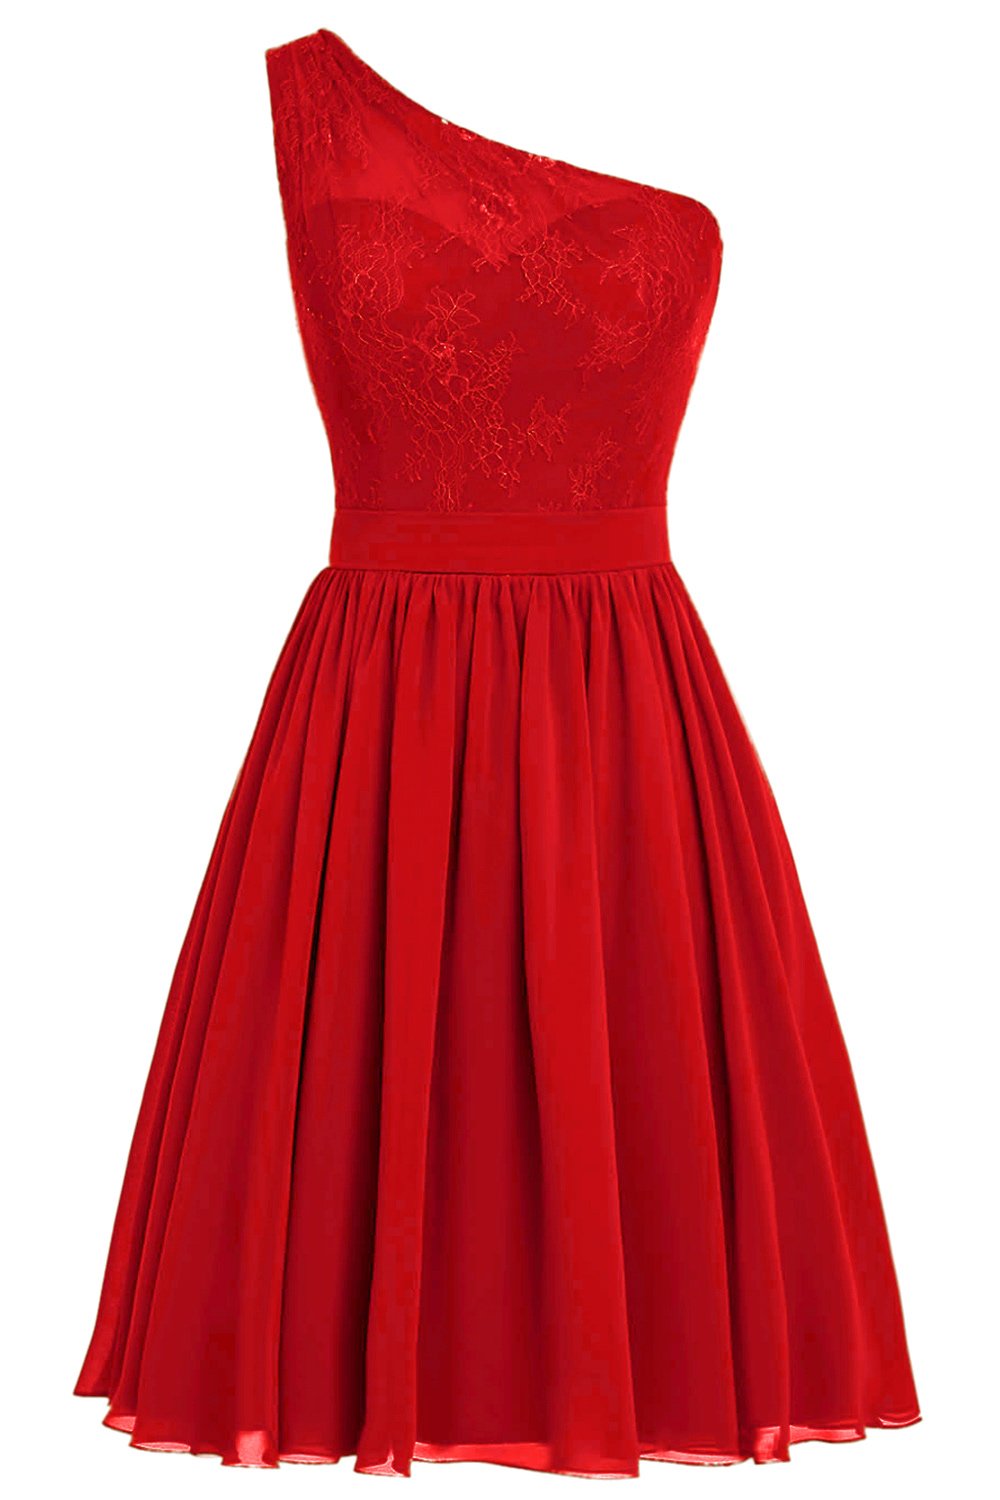 One Shoulder Red Graduation Dress with Lace